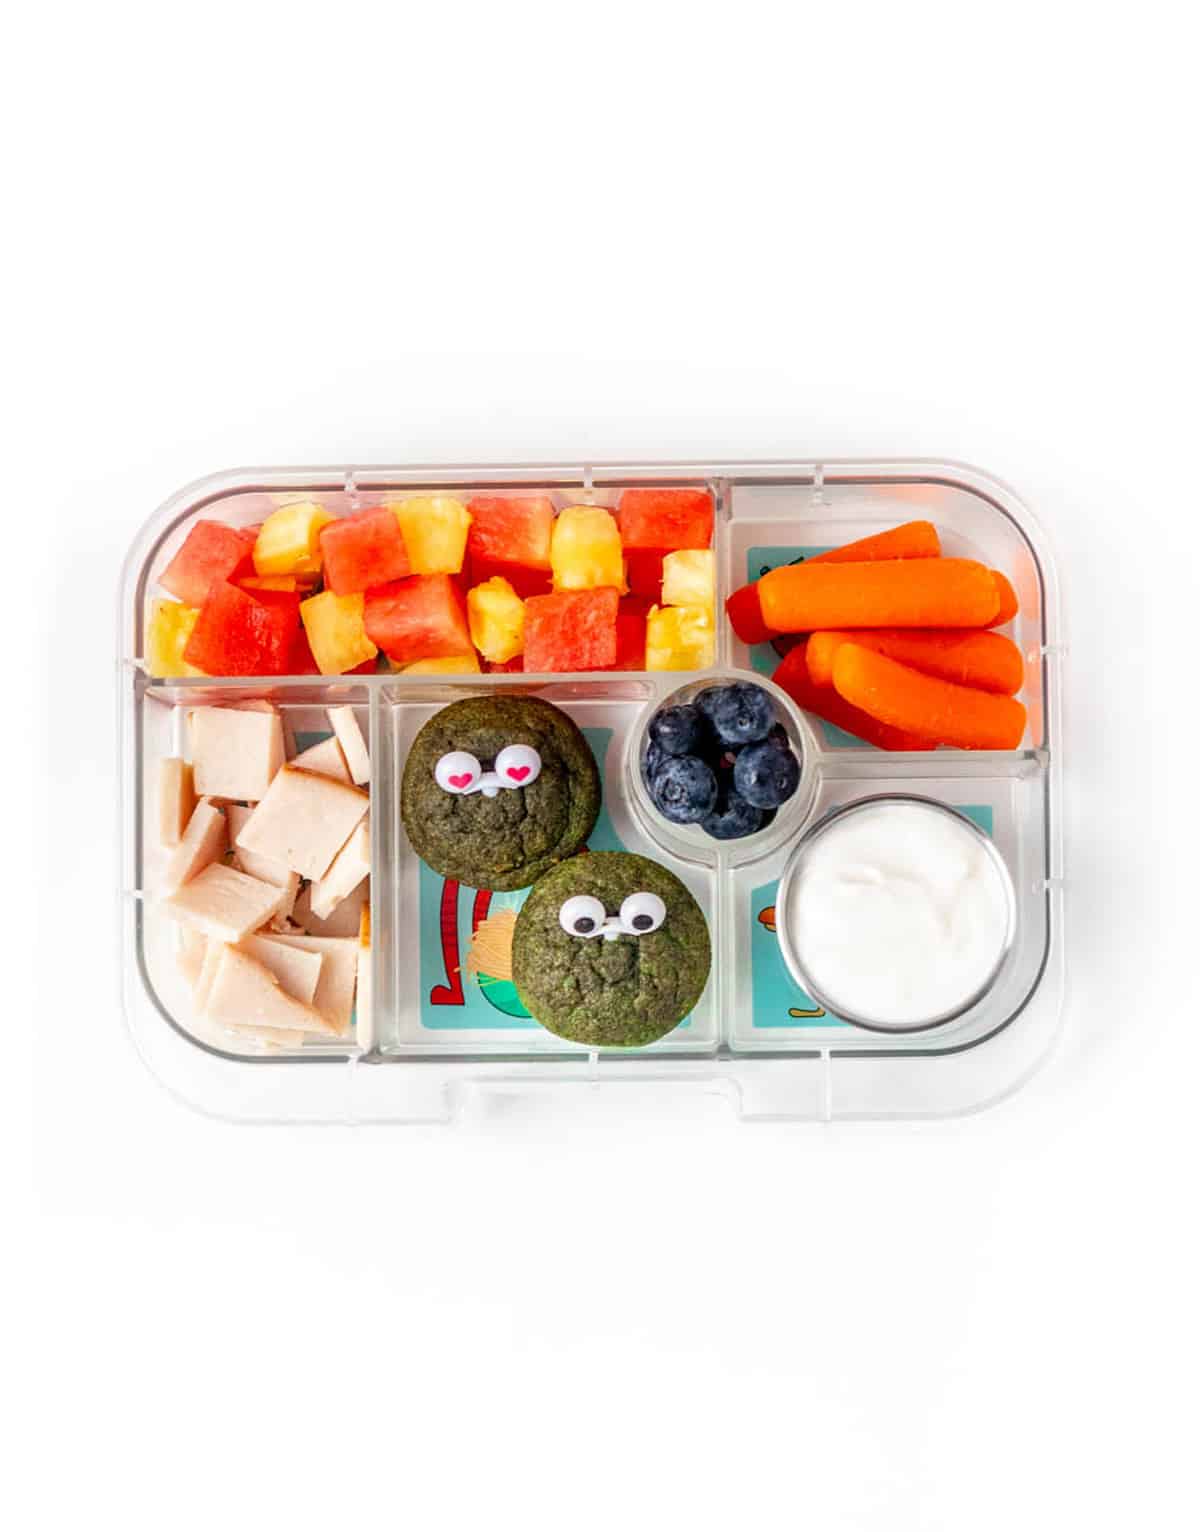 A lunch box with deli turkey squares, green monster muffins, watermelon, pineapple, blueberries, carrot sticks and Greek yogurt.